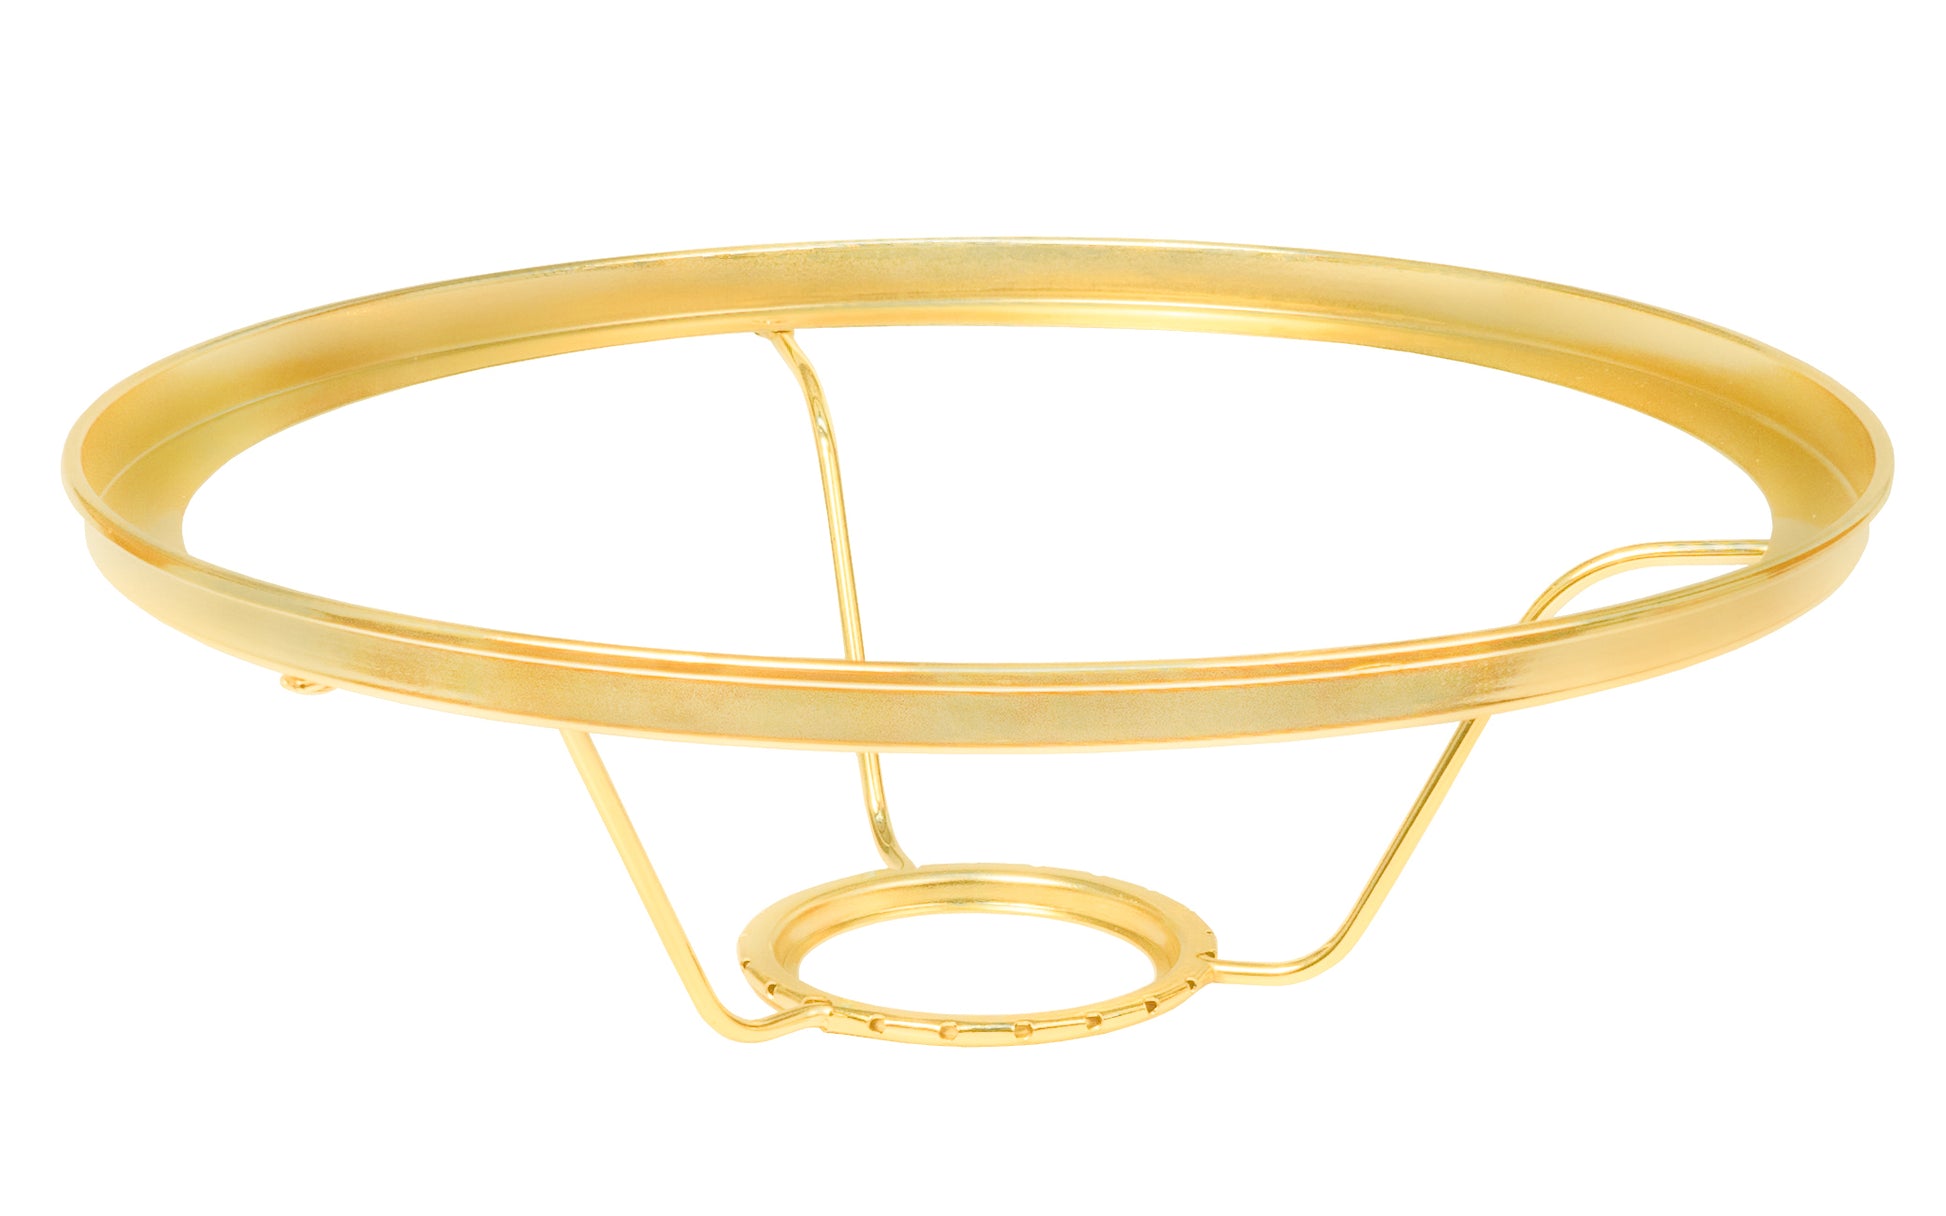 Aladdin 10" Brass Plated Ring Shade ~ No. 401RB ~ This quality Aladdin 10" Brass Plated Ring Shade (No. 401RB) is designed to attach under the base of Aladdin Burners to support a glass shade.